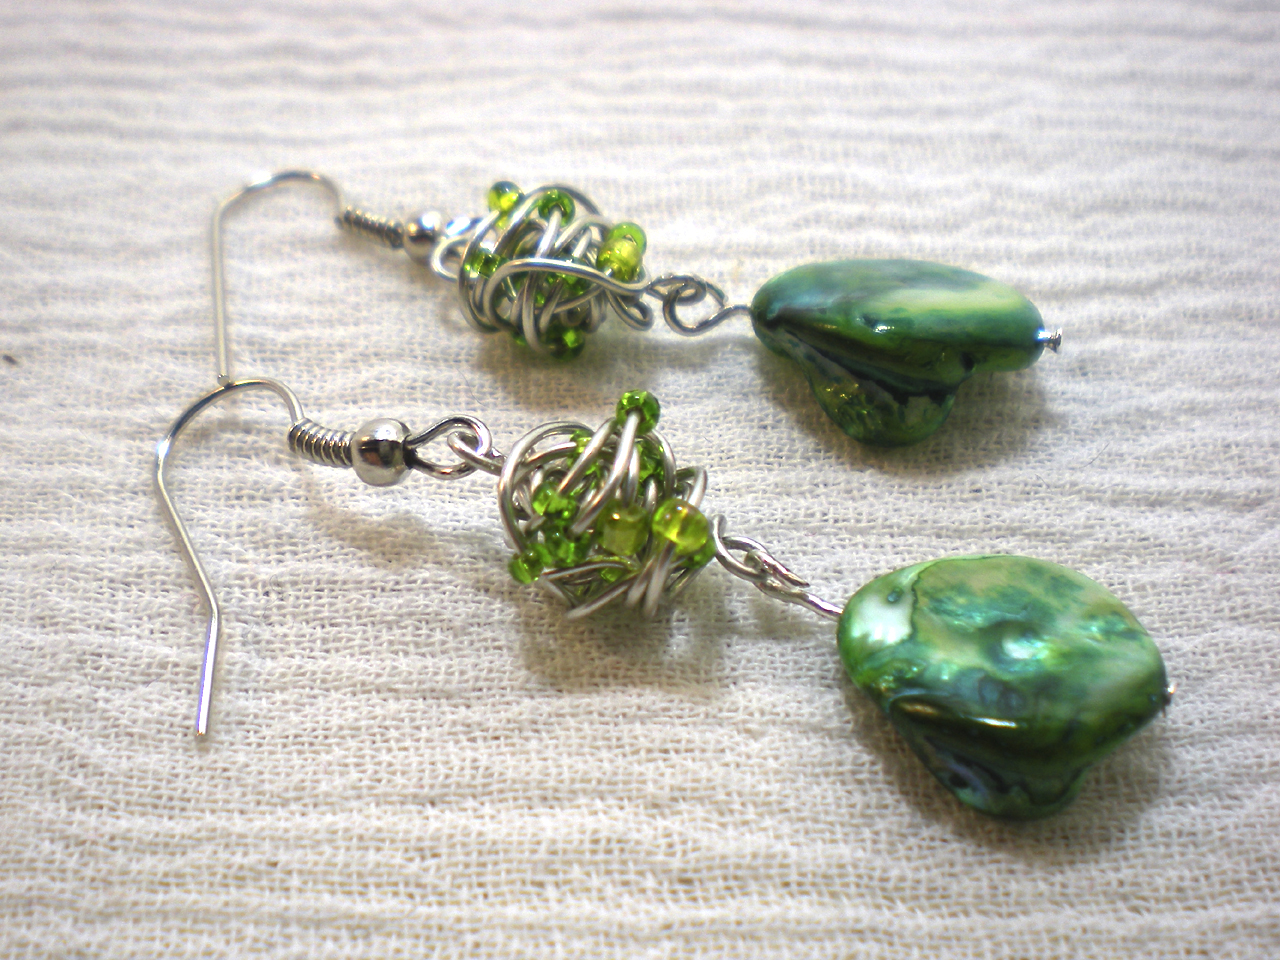 Make Your Own Tangled Wire Beads - Video Tutorial